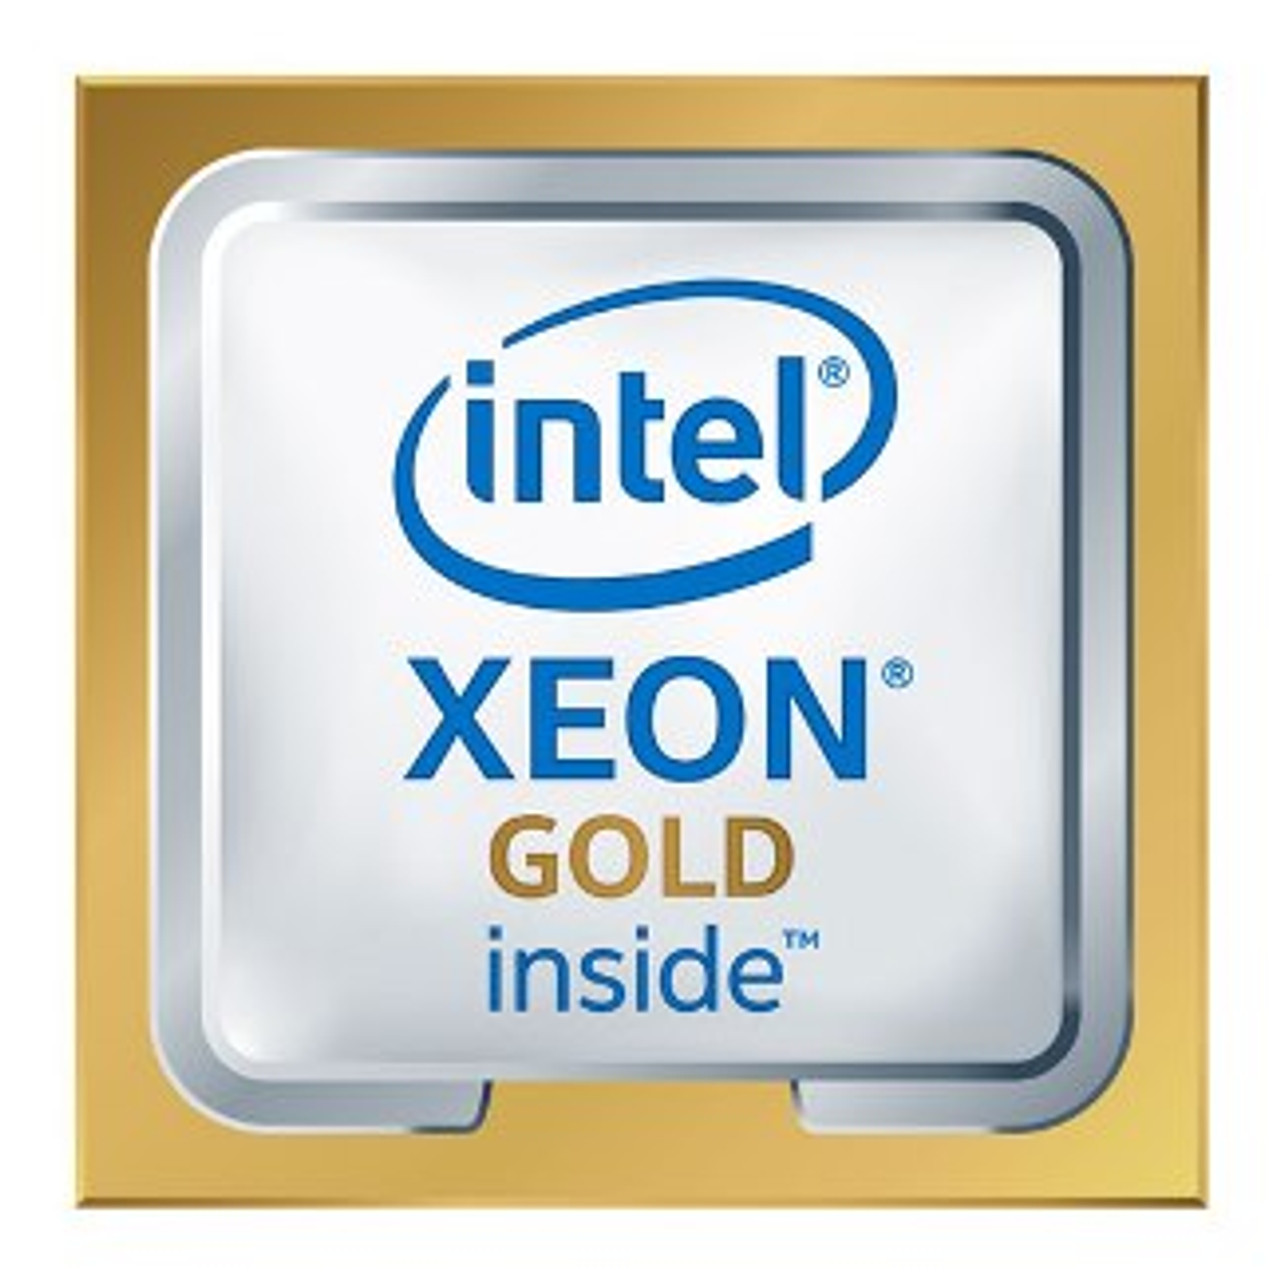 INTEL SRGZG Xeon 24-core Gold 6248r 3.0ghz 35.75mb Smart Cache 10.4gt/s Upi Speed Socket Fclga3647 14nm 205w Processor Only